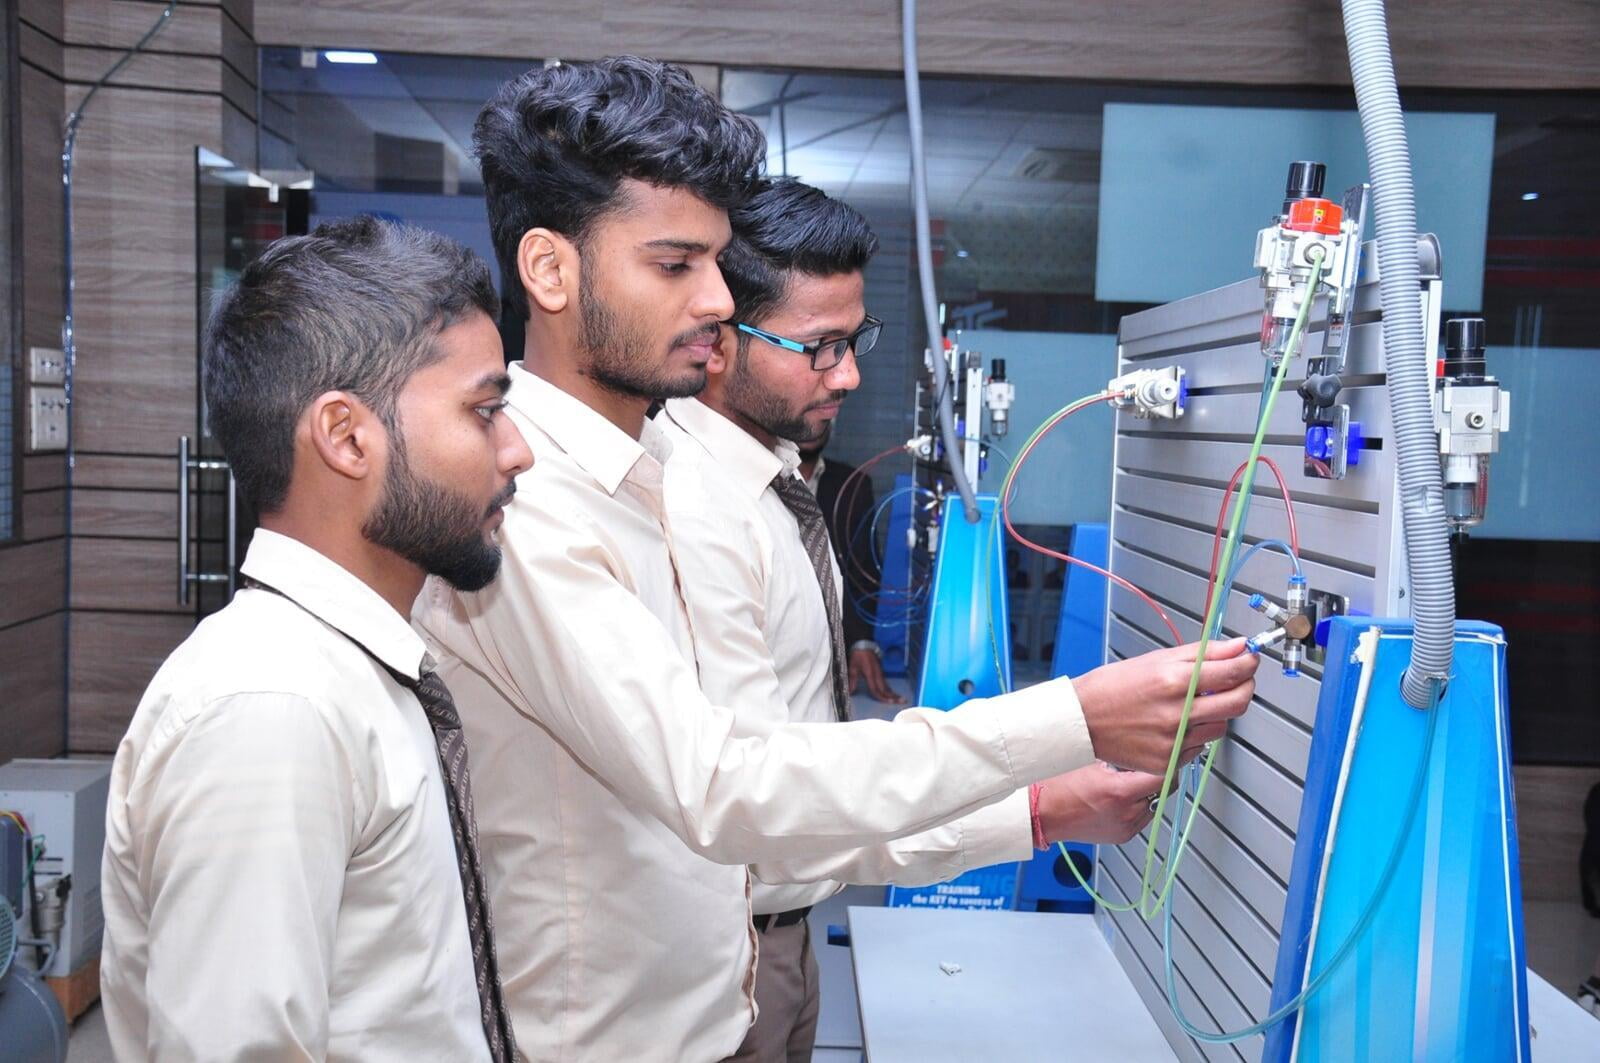 ITS Mechanical Engineering Lab with students